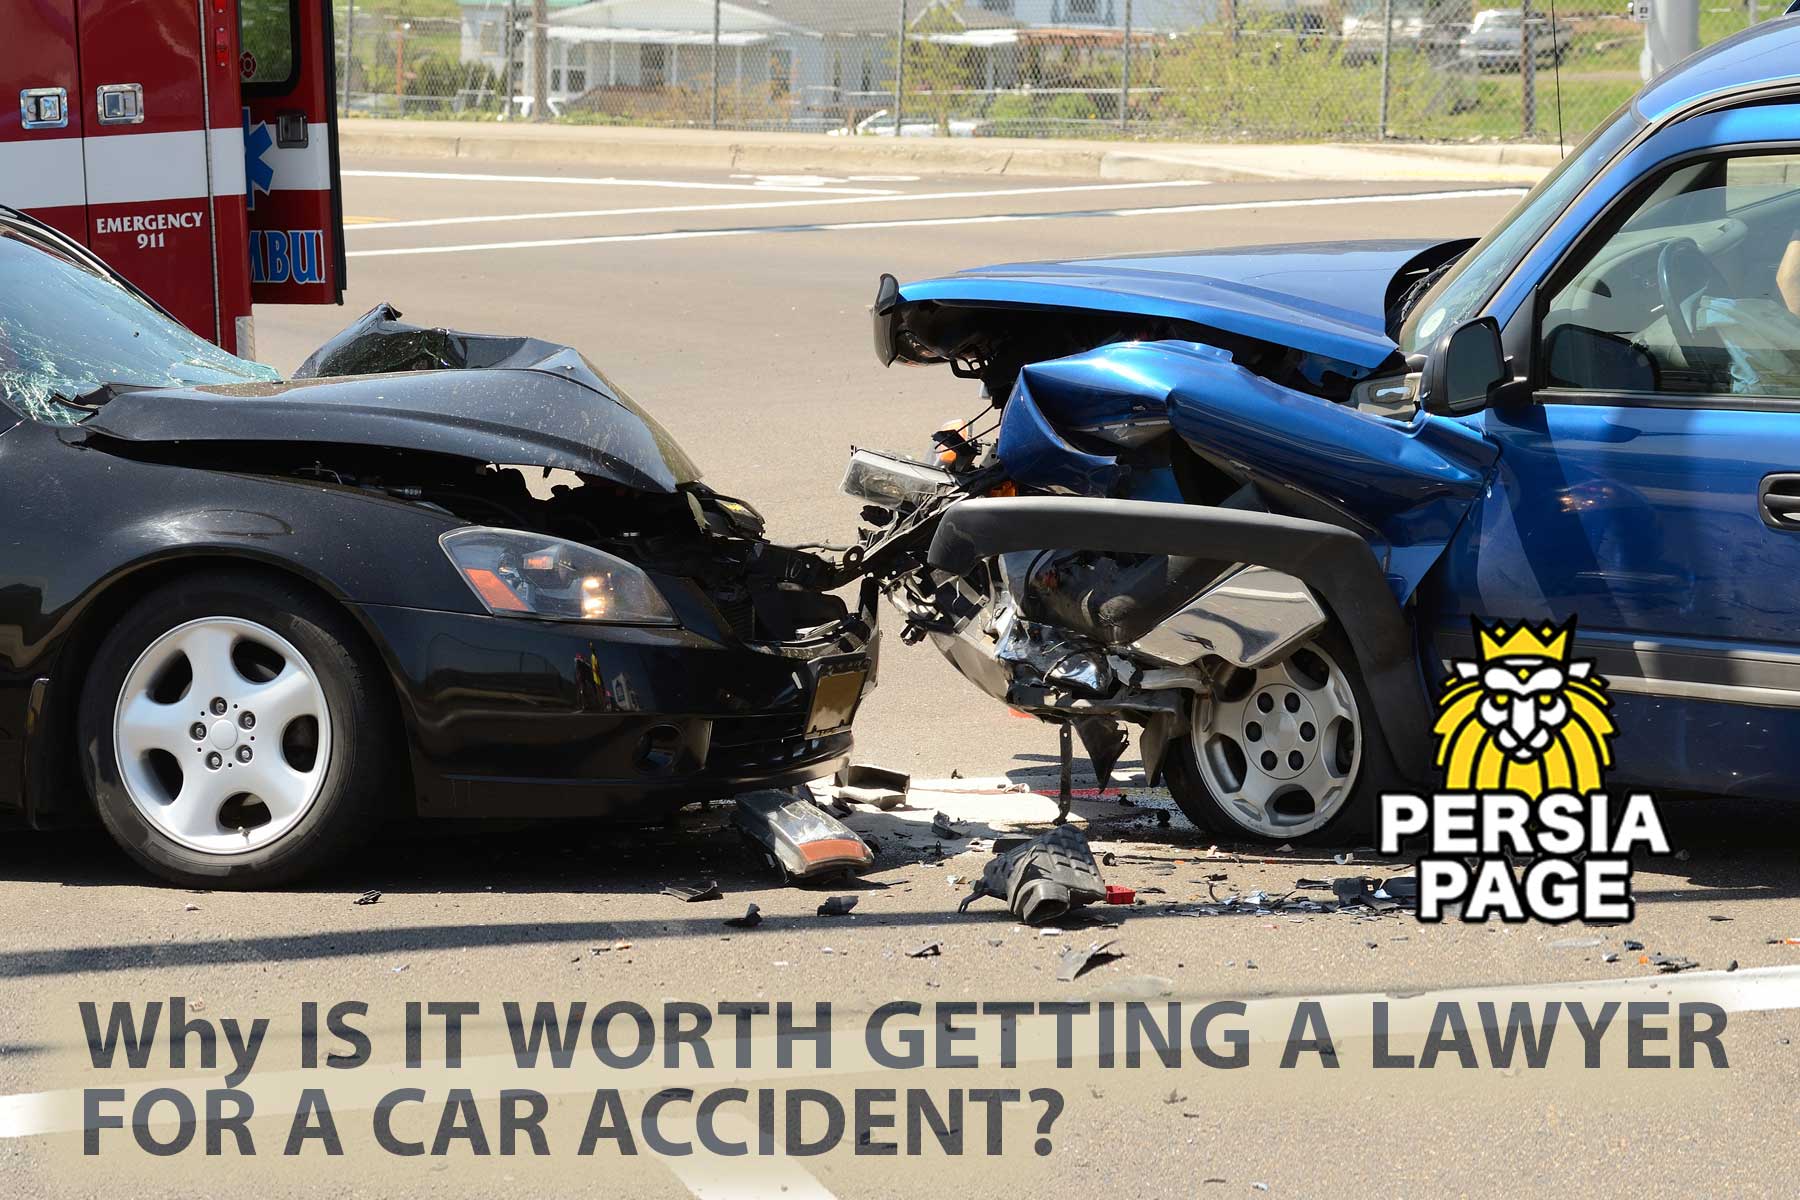 Accident Lawyer